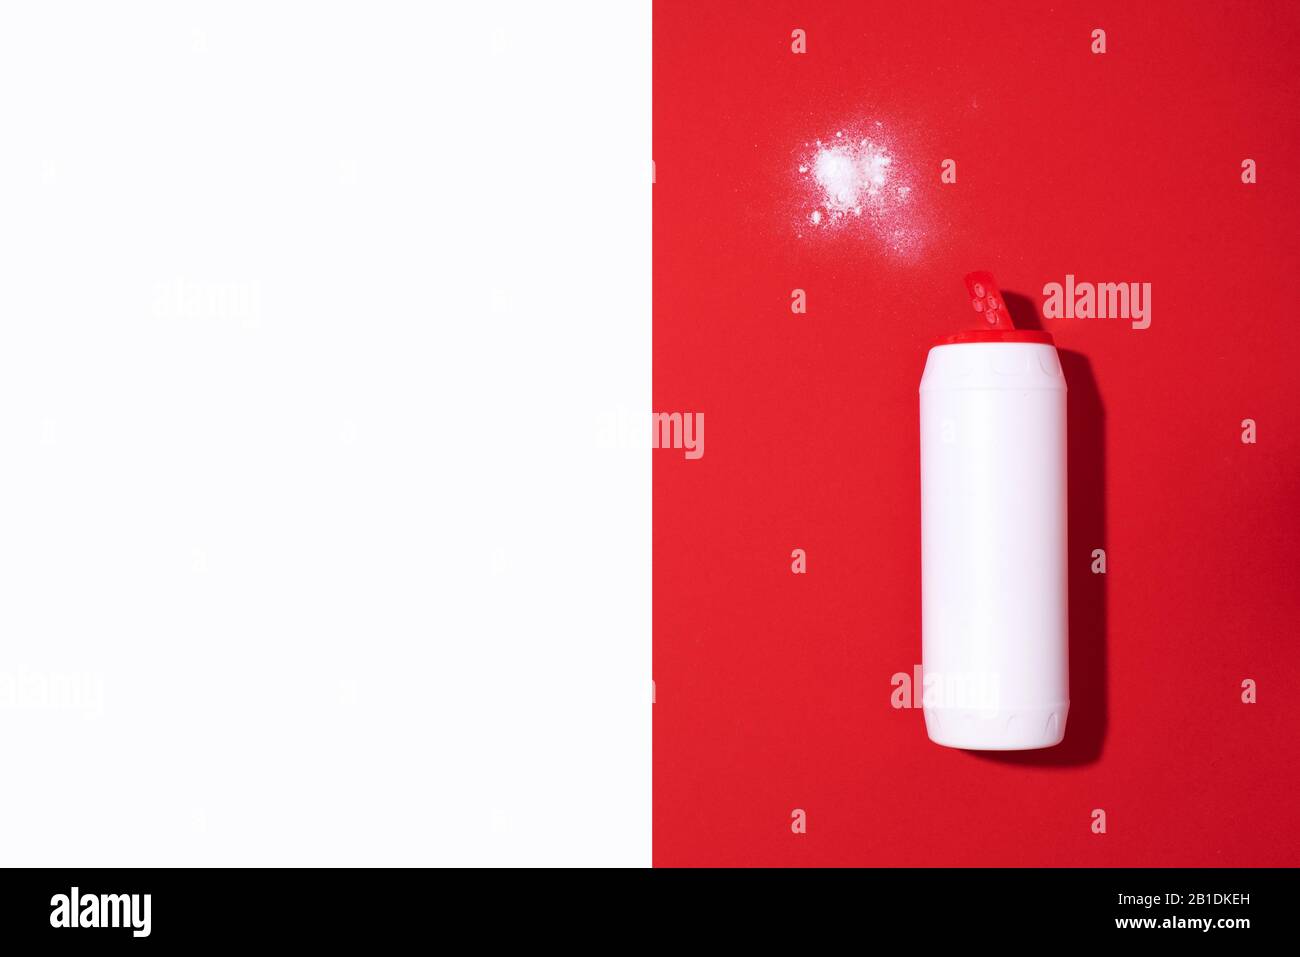 White plastic bottle of detergent powder or cleaning agent on red background. Copy space. Top view. Flat lay. Household chemicals concept. Stock Photo